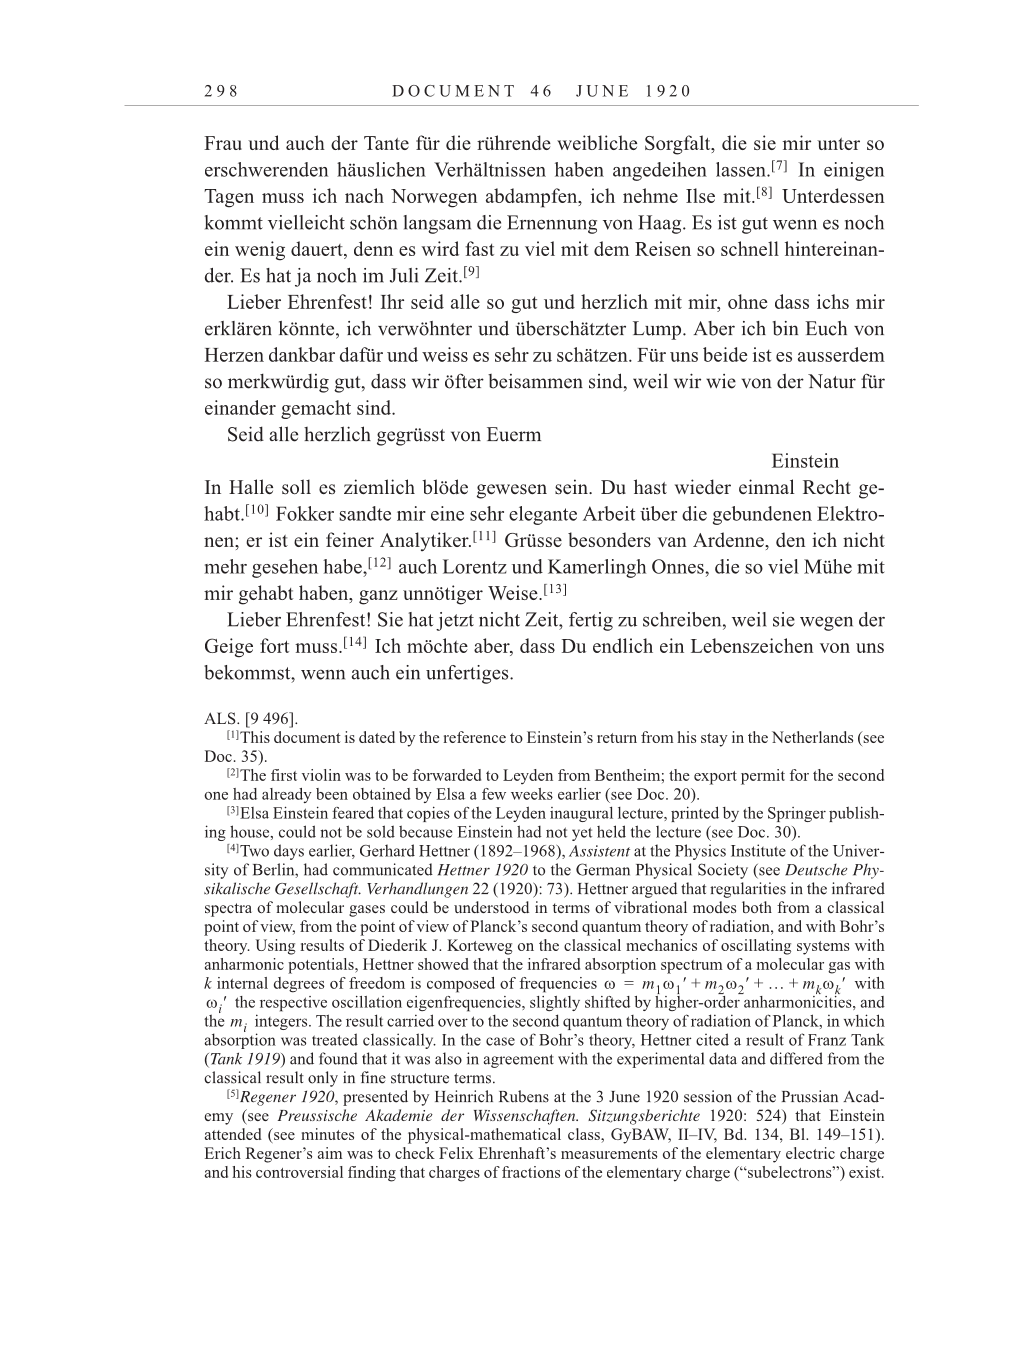 Volume 10: The Berlin Years: Correspondence May-December 1920 / Supplementary Correspondence 1909-1920 page 298